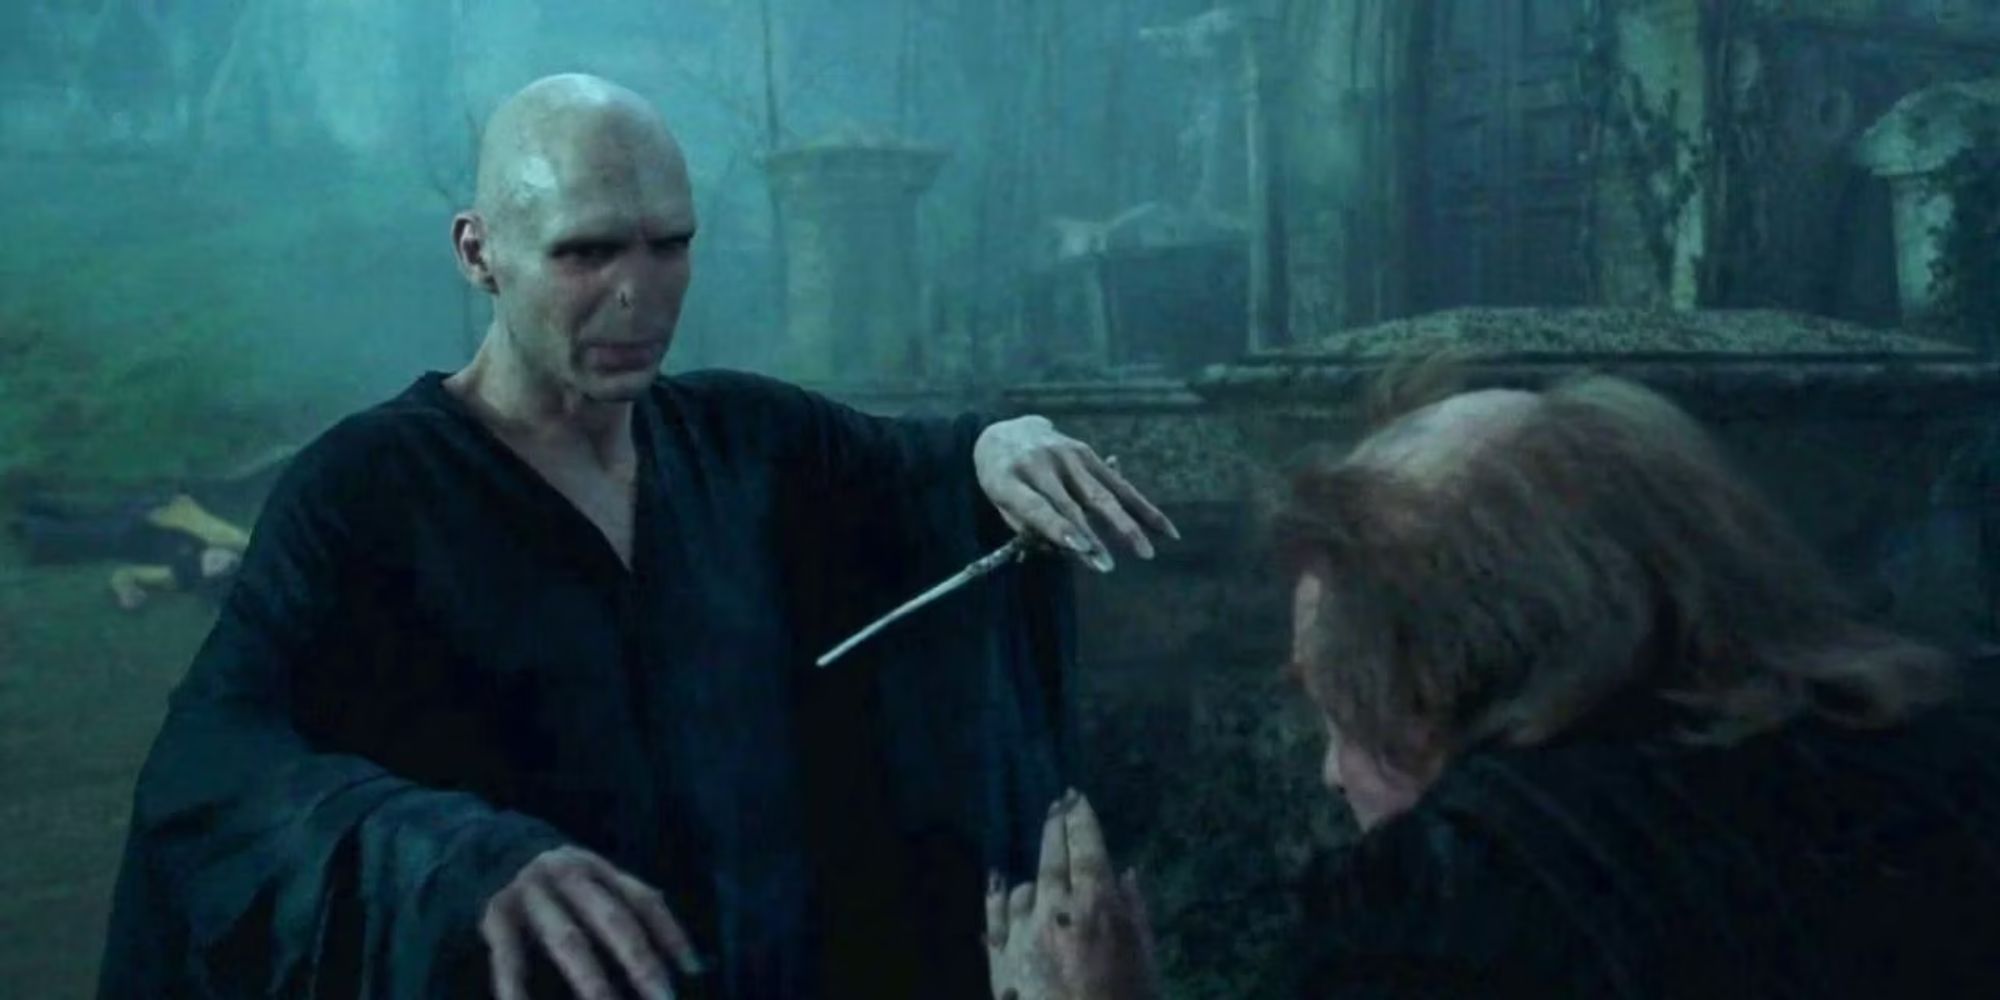 Wormtail-Peter-Pettigrew-Voldemort-Harry-Potter-and-the-Goblet-of-Fire Cropped (1) (1)